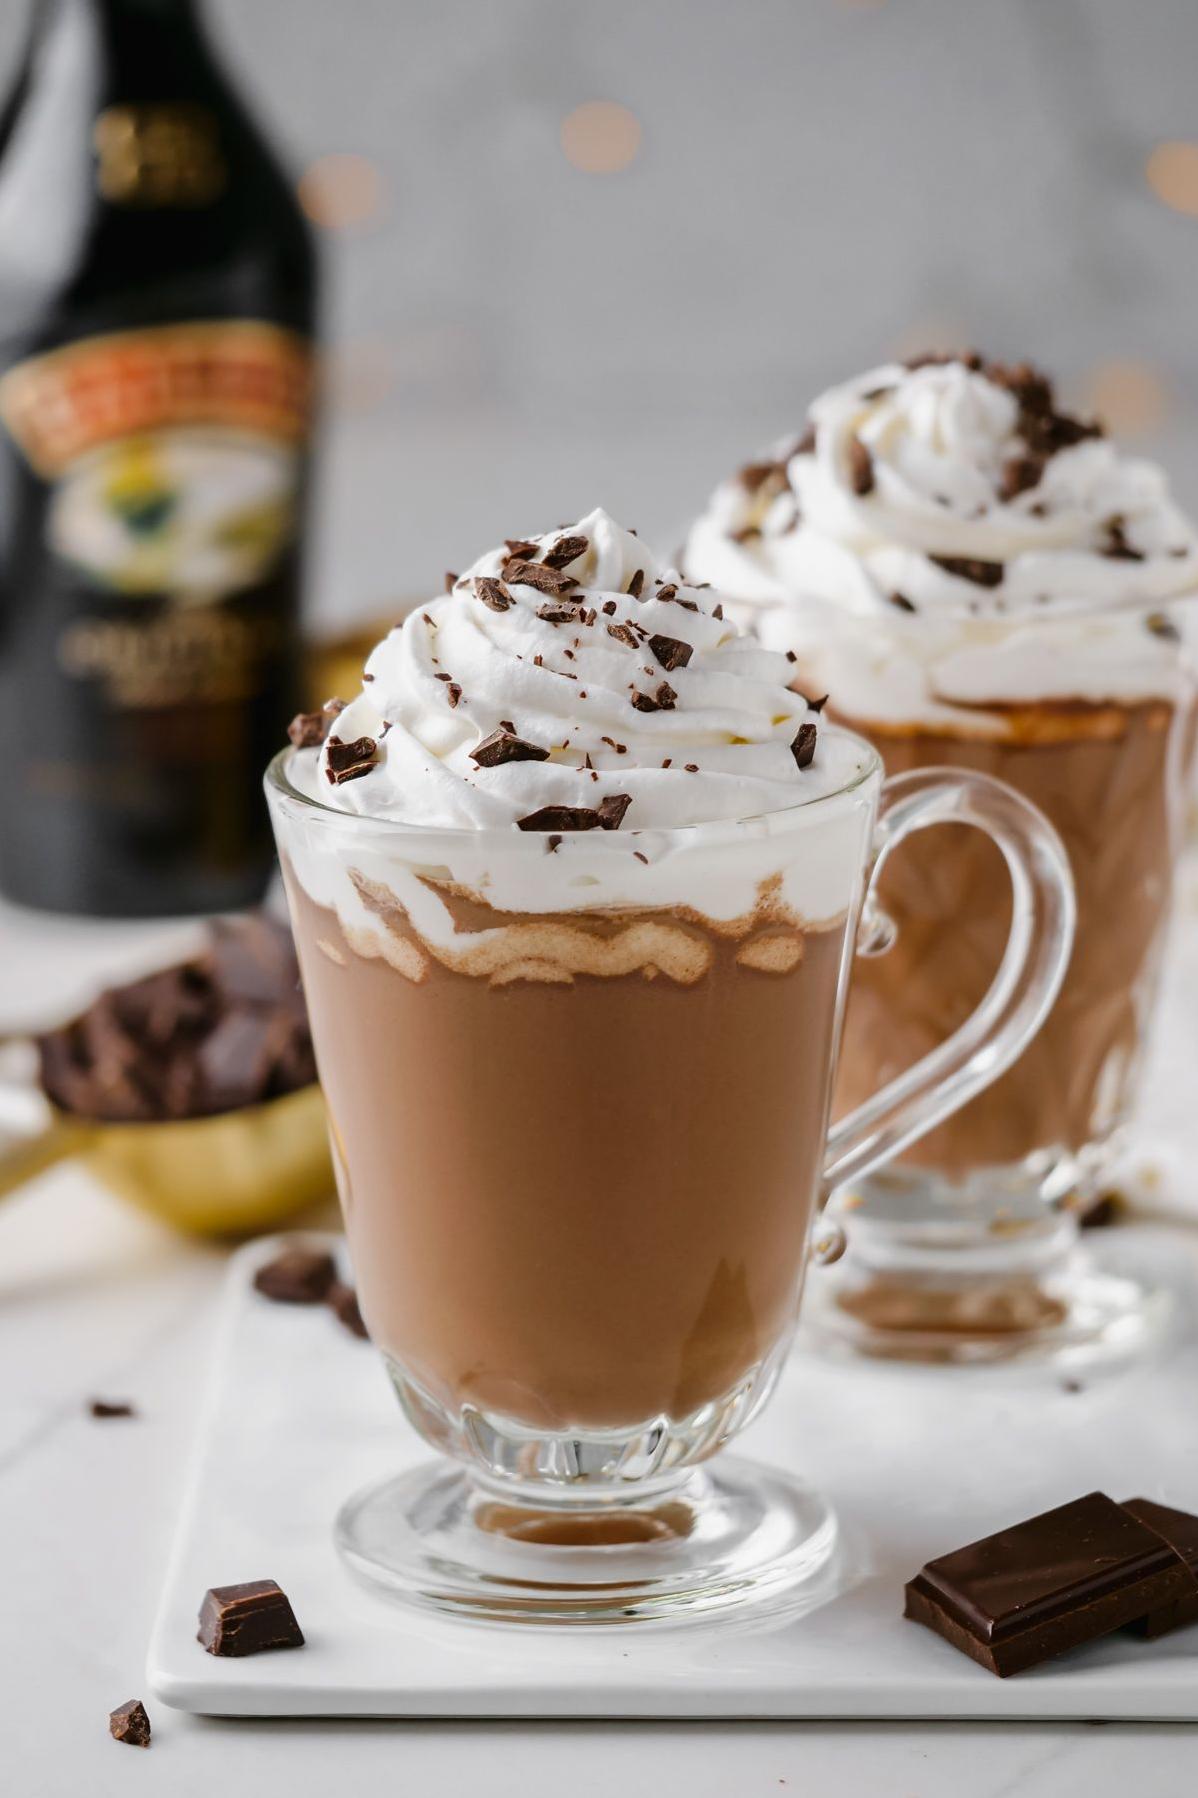  Cozy up with a mug of Irish Cream cocoa and enjoy the simple pleasures in life.